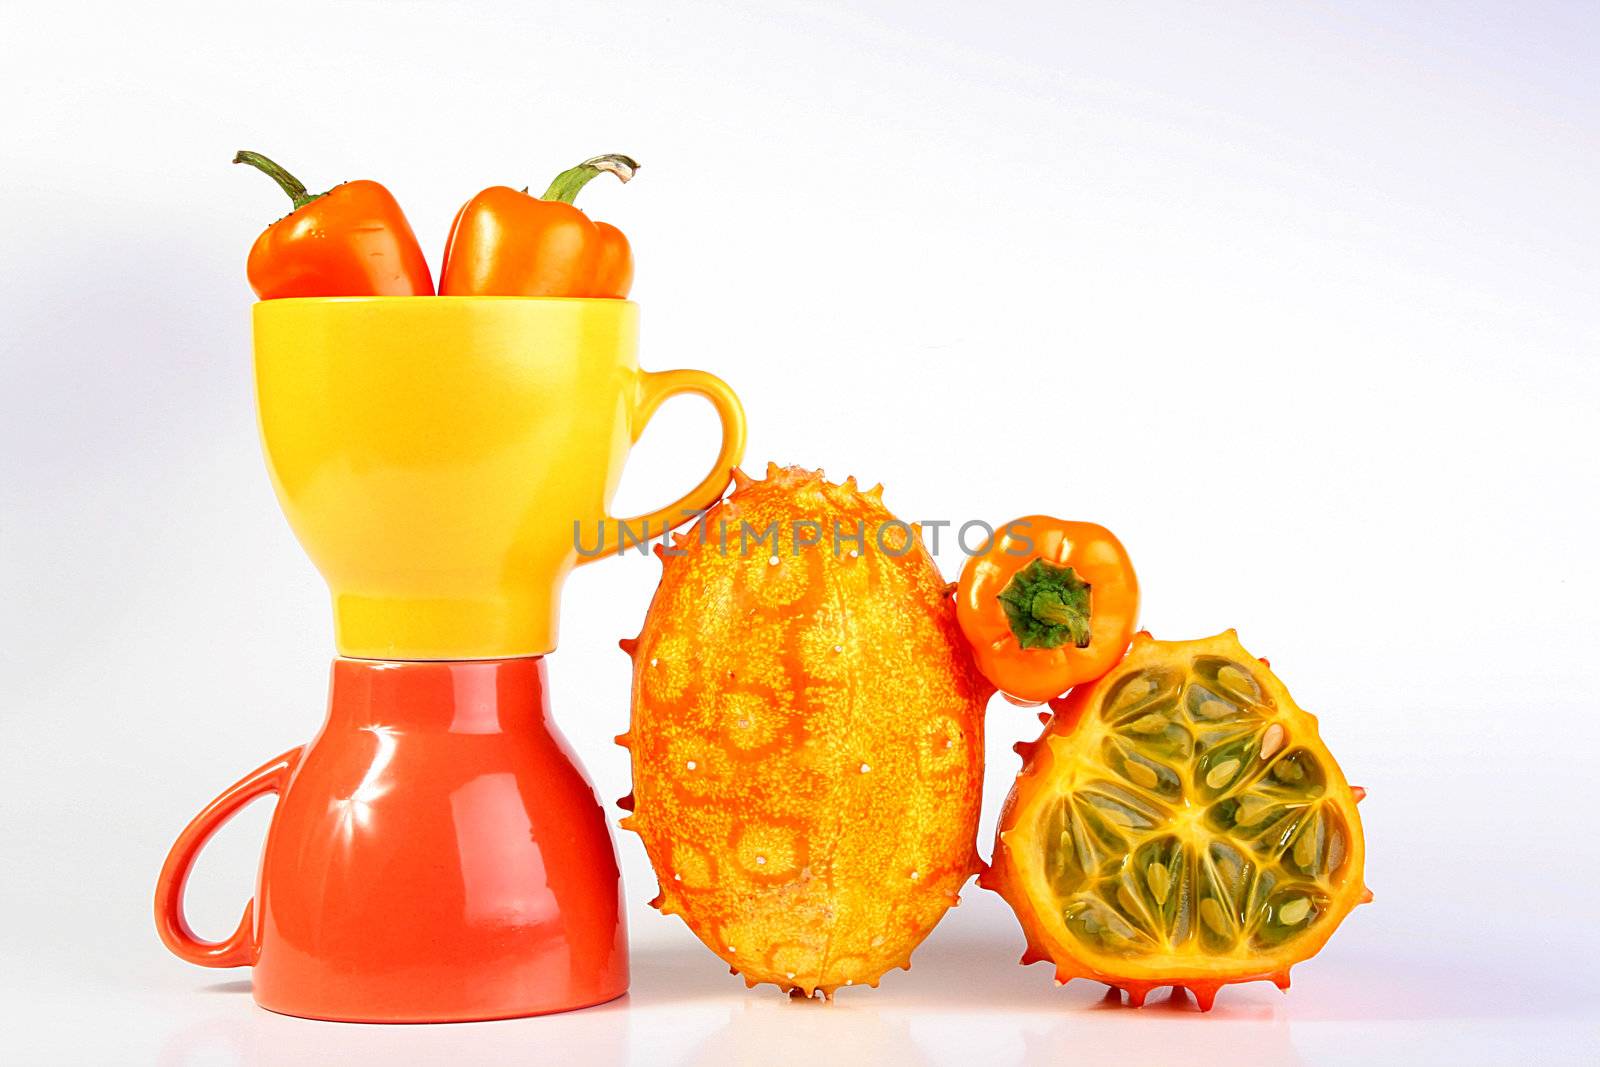 Two cups with vegetables a hot pepper and Kiwanos, one of Kiwanos is cut. Exotic fruit Kiwanos, is used for preparation of salads and for an ornament of dishes.